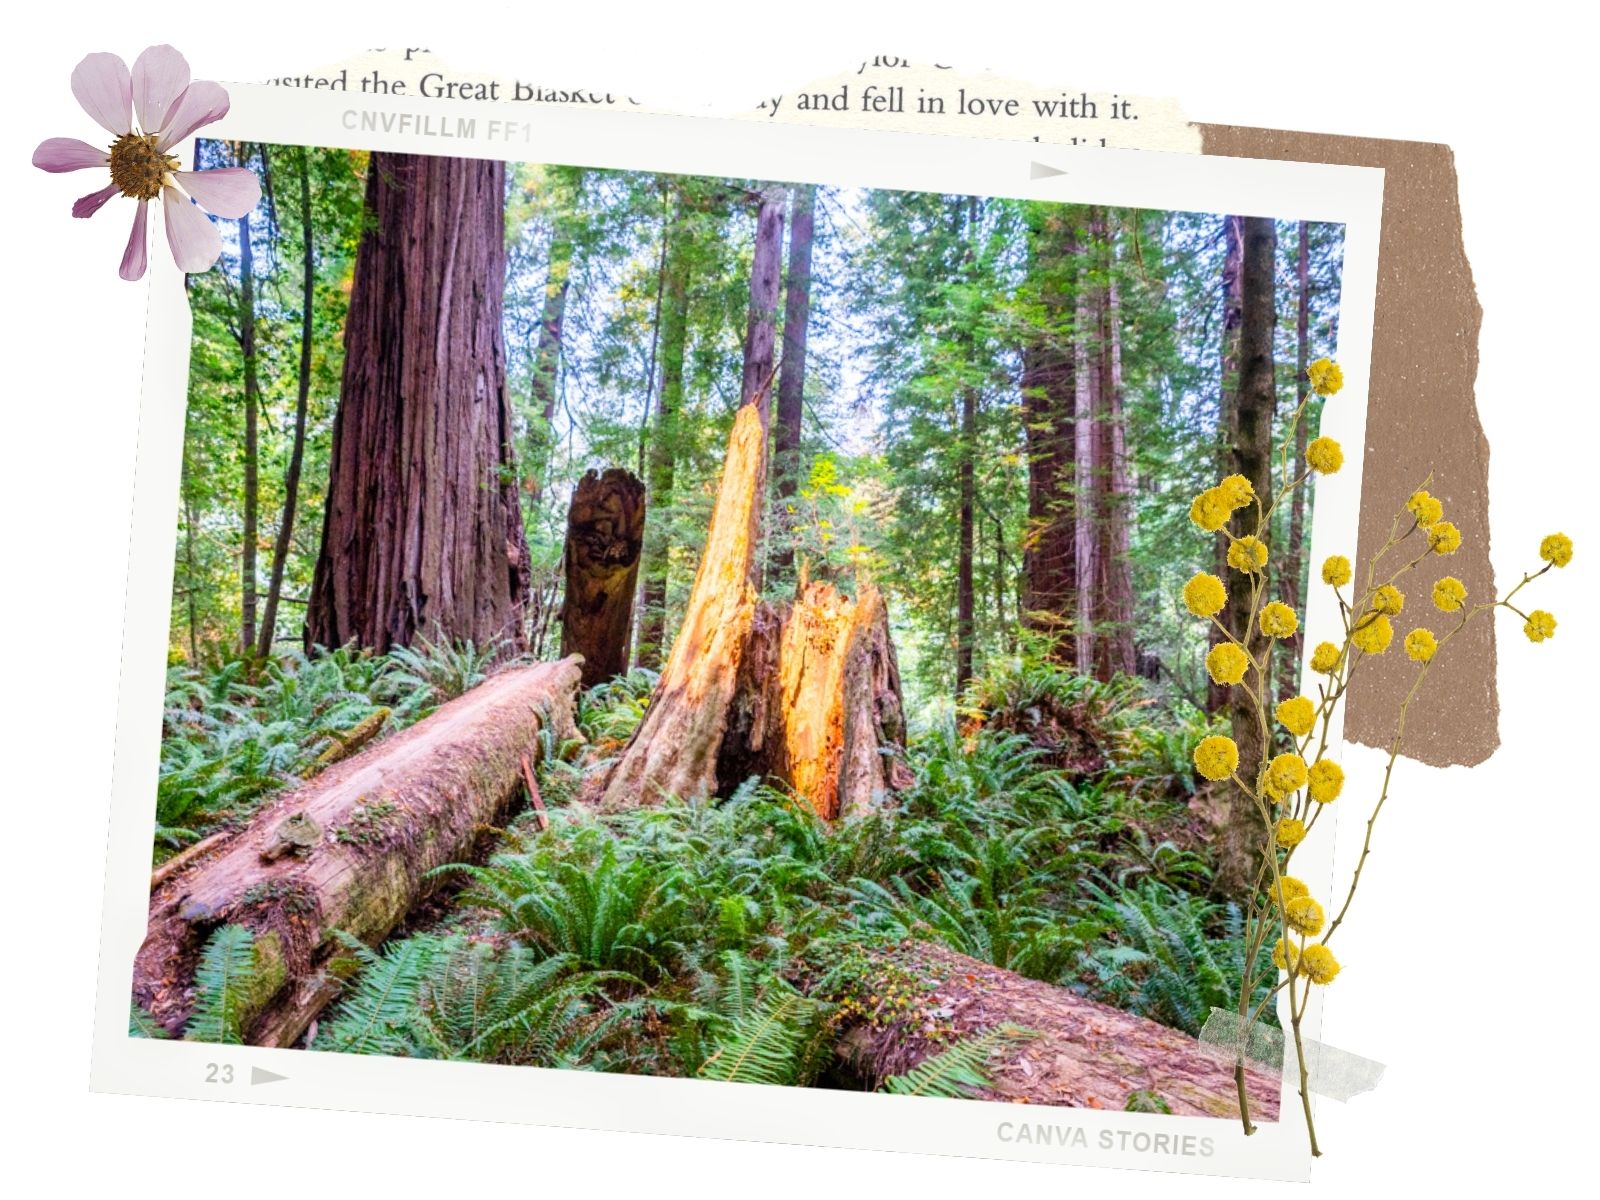 Redwood National Park: Mill Creek Campground: Where is Hyperion?